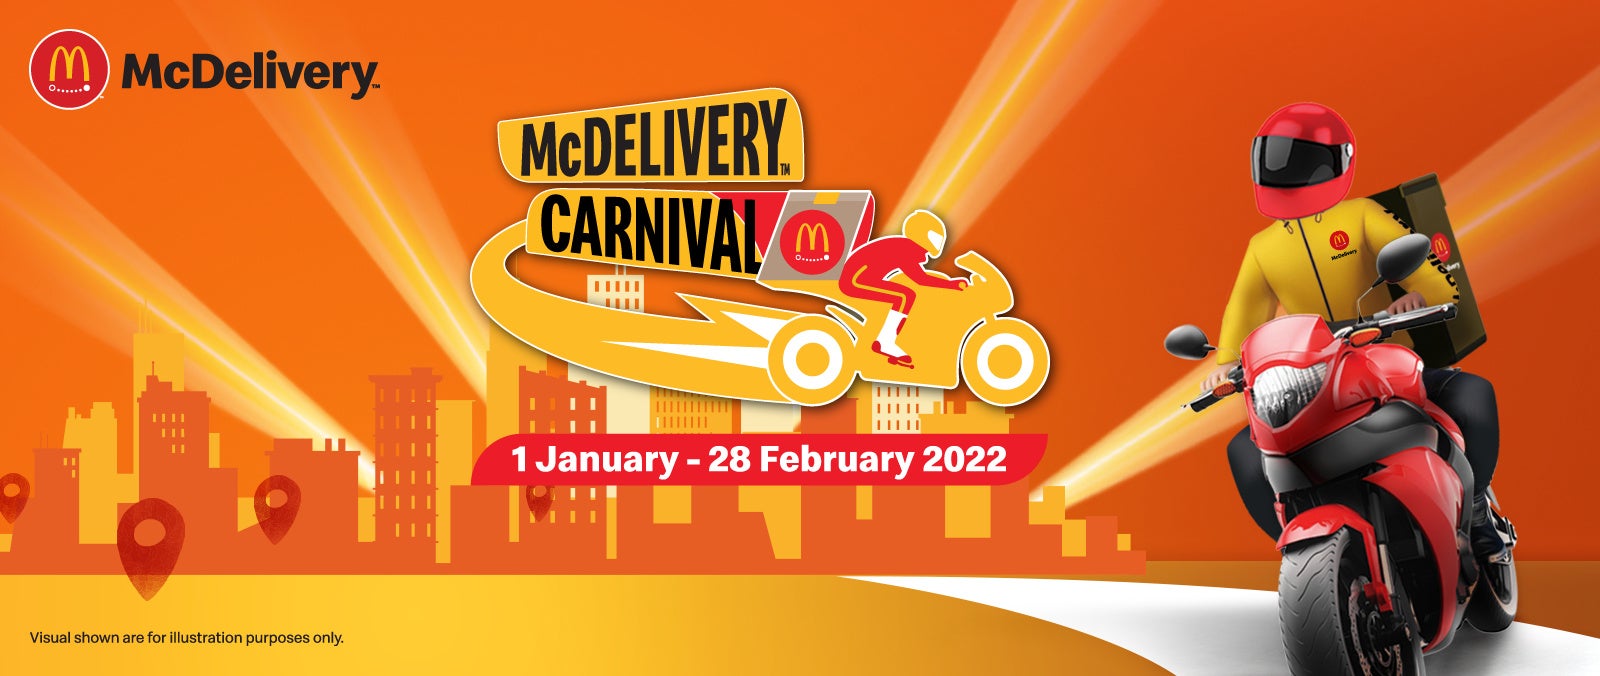 McDCarnival Carnival PromoBanners Generic 1600x676 1